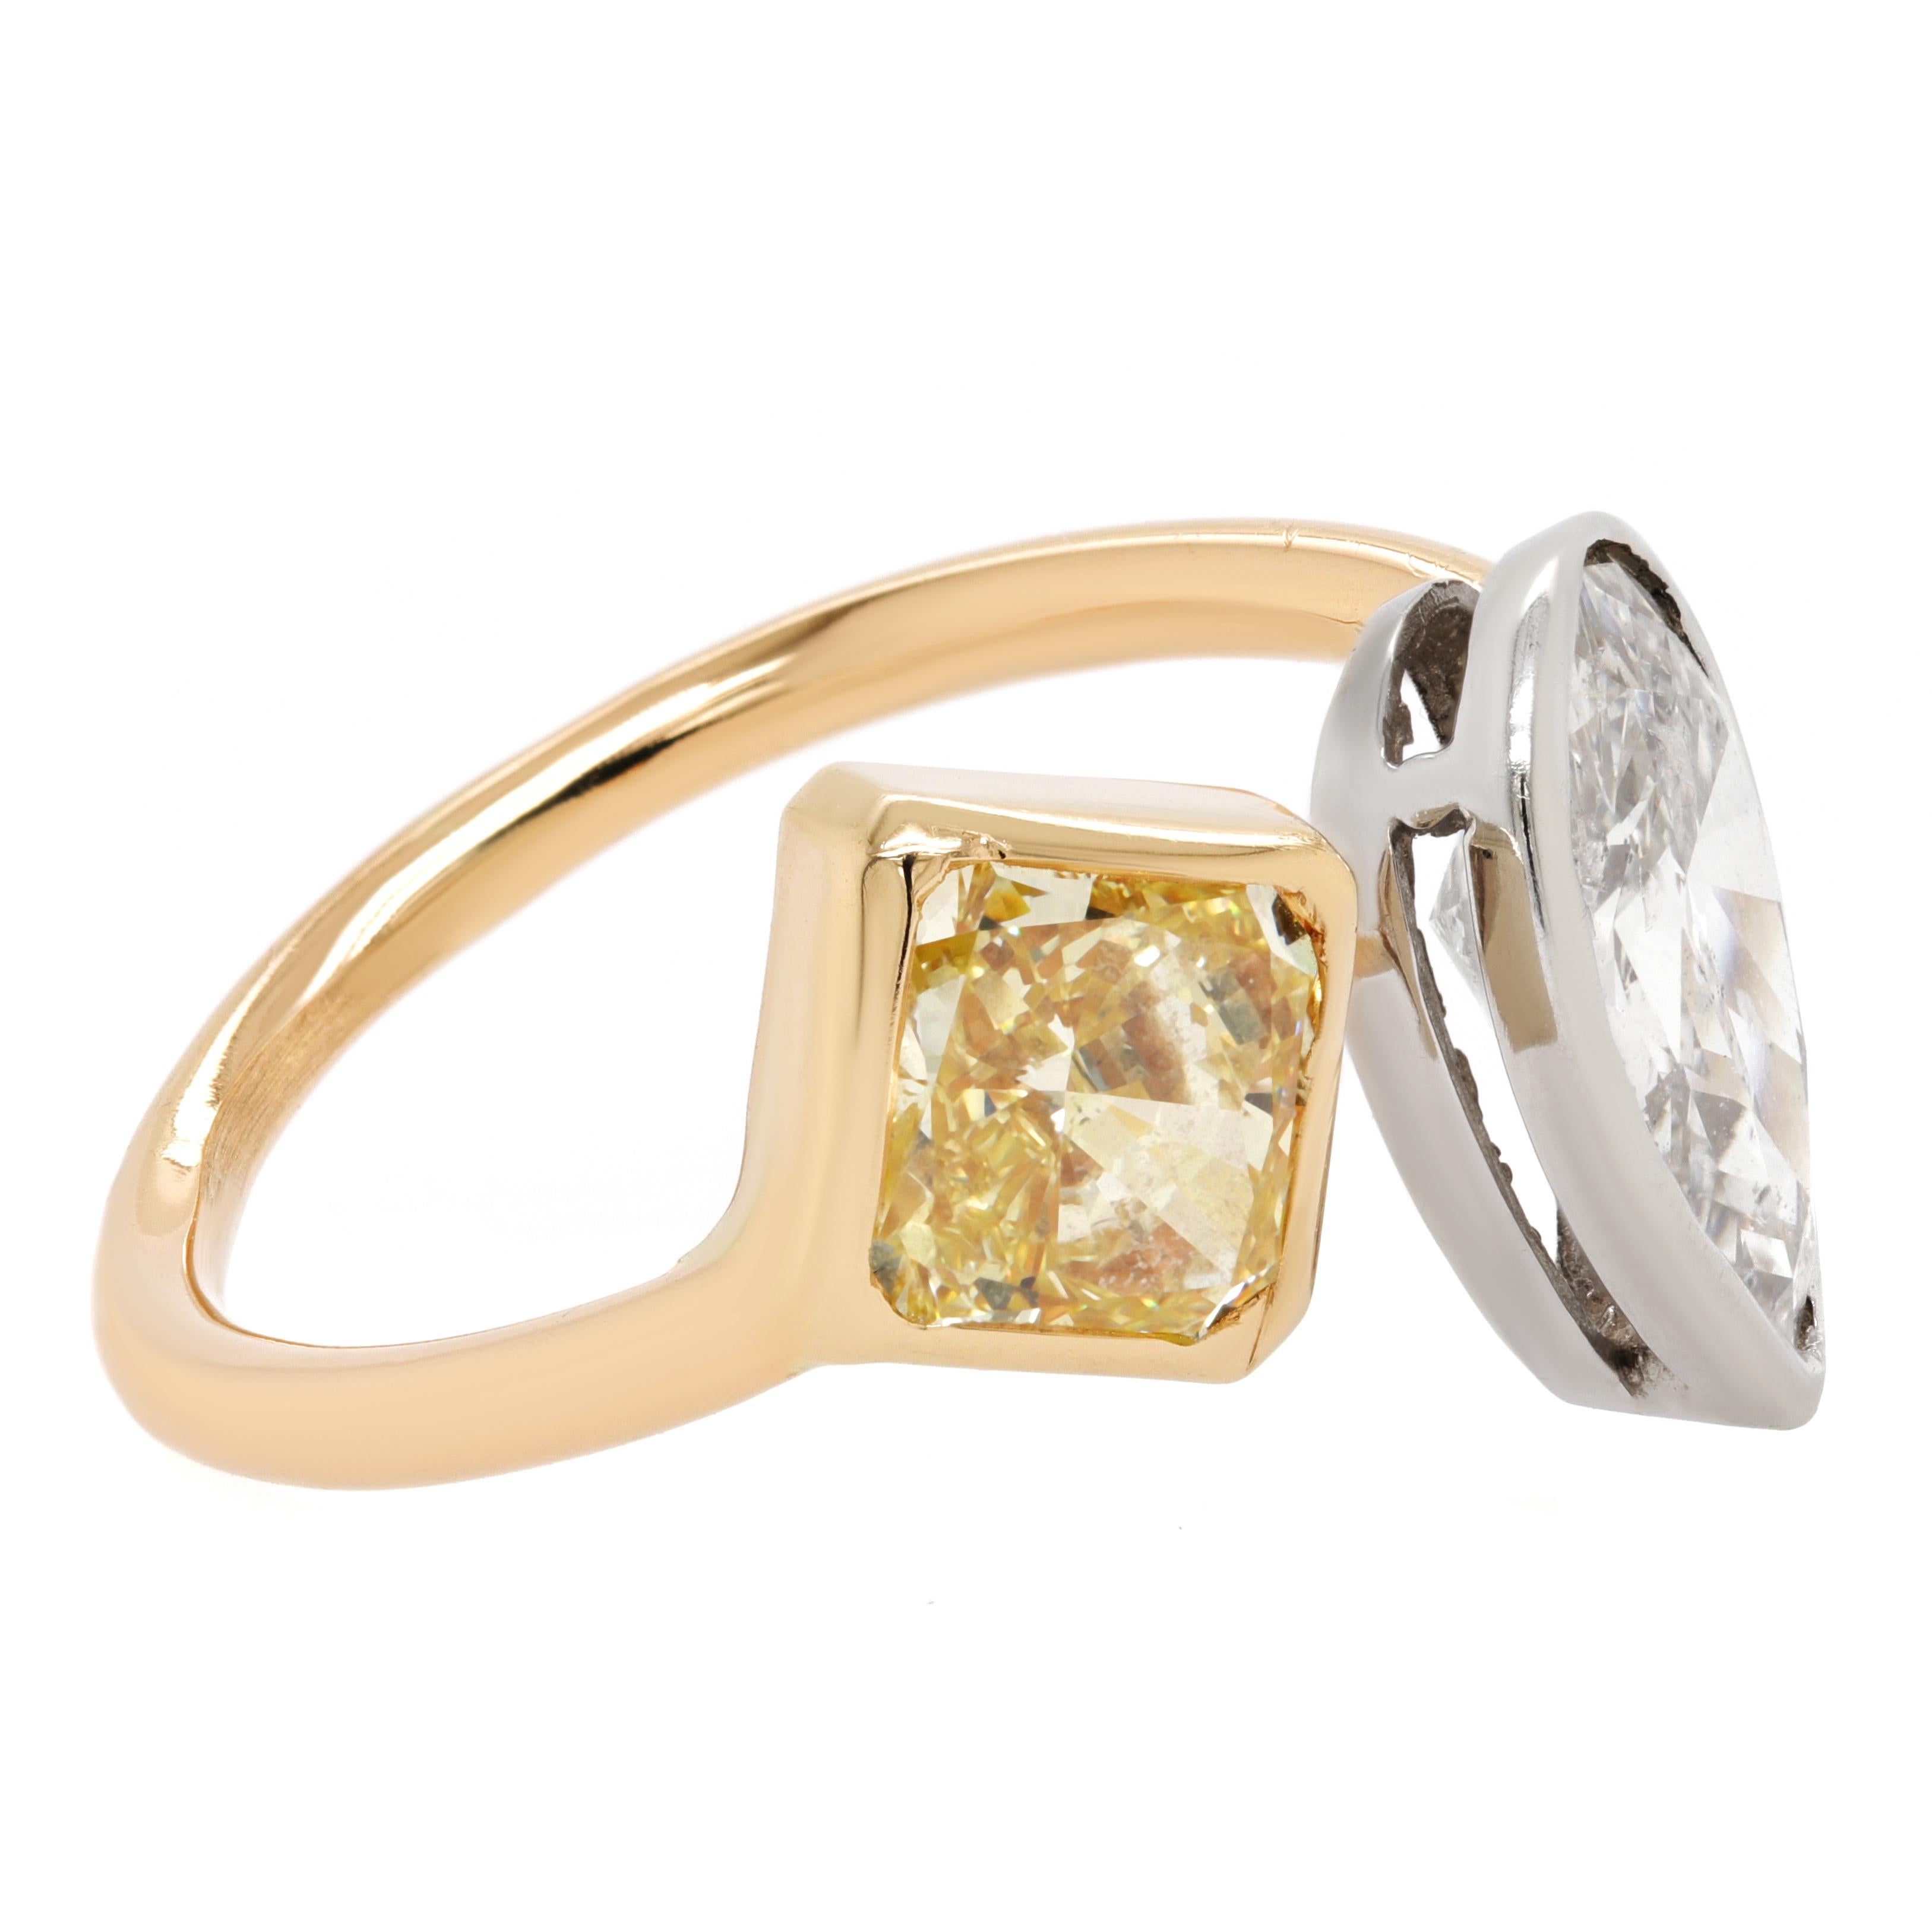 Modern Jay Feder 14k Yellow Gold White Fancy Color Diamond Bypass Ring